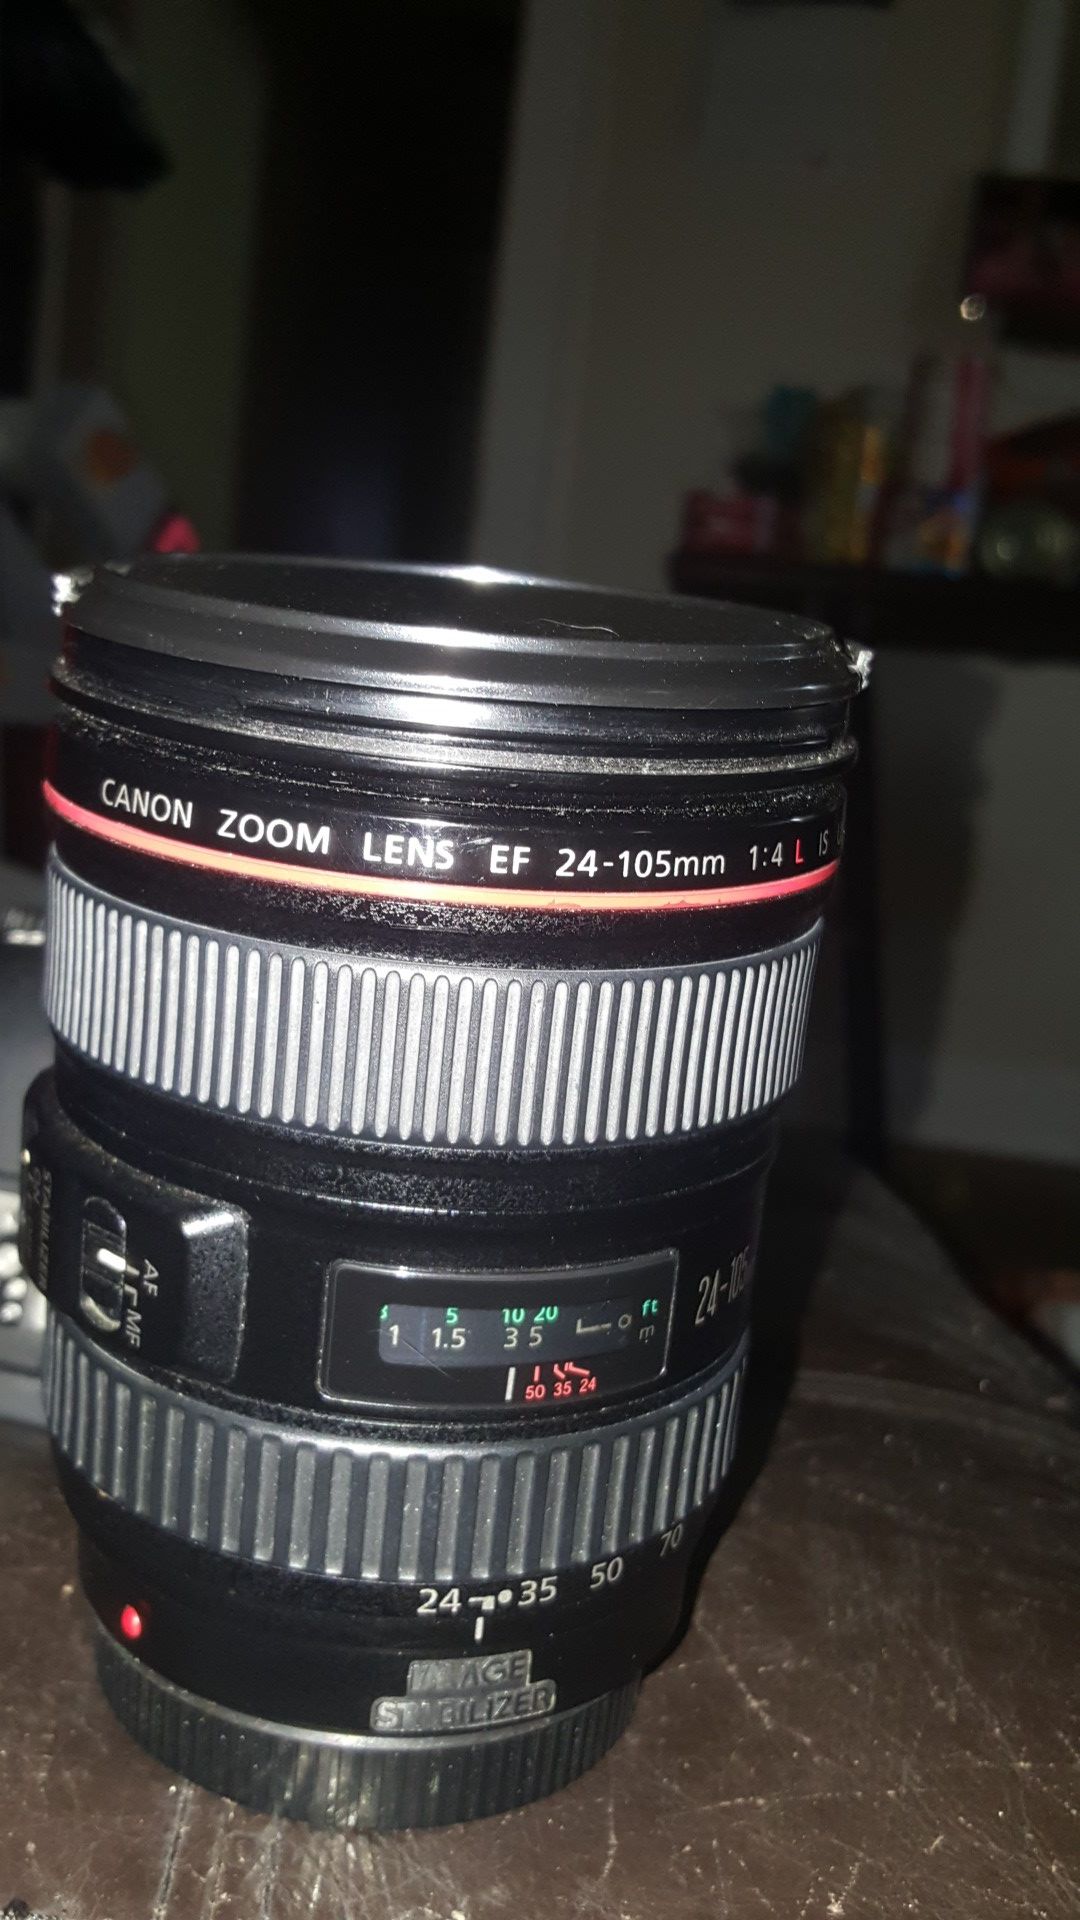 Canon lens 24 -105 1:4 L.You can only use in manual mode. AF mode does not work very well